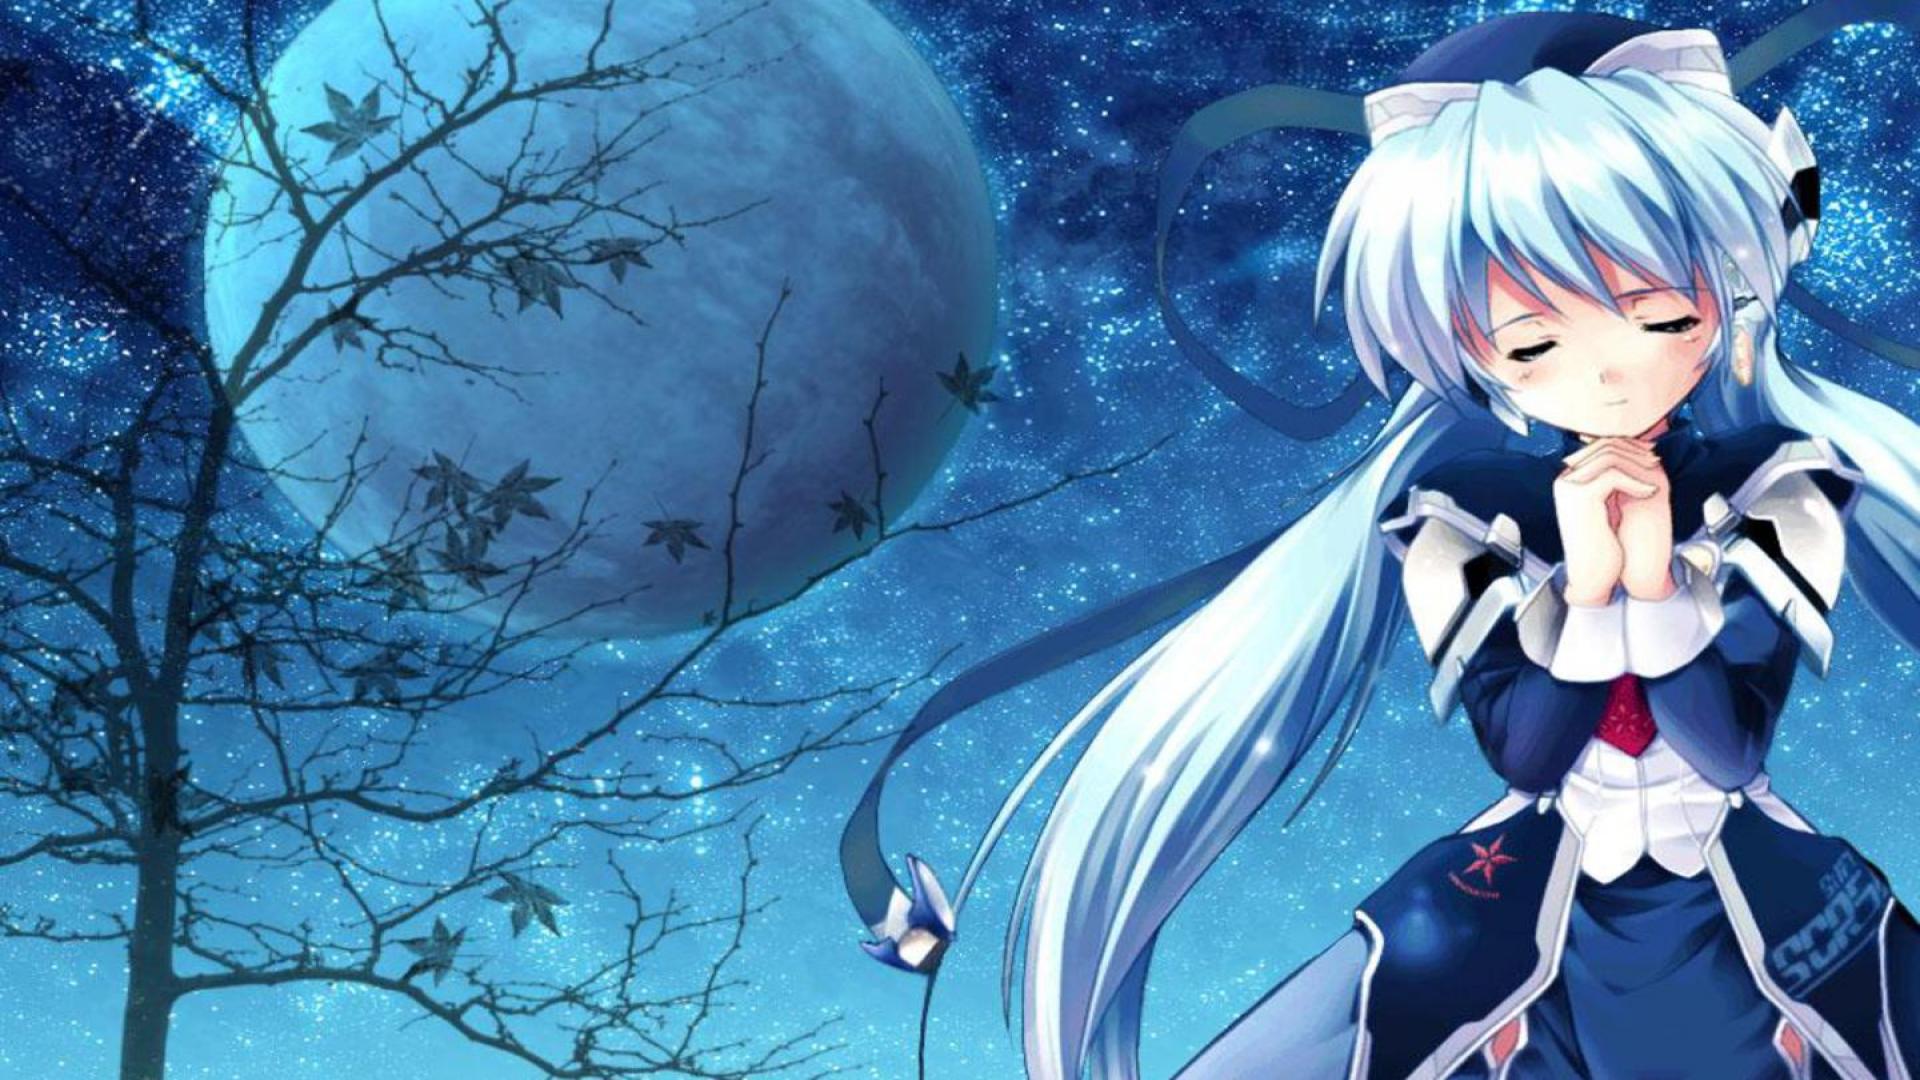 download sad anime wallpaper which is under the anime wallpapers 1920x1080